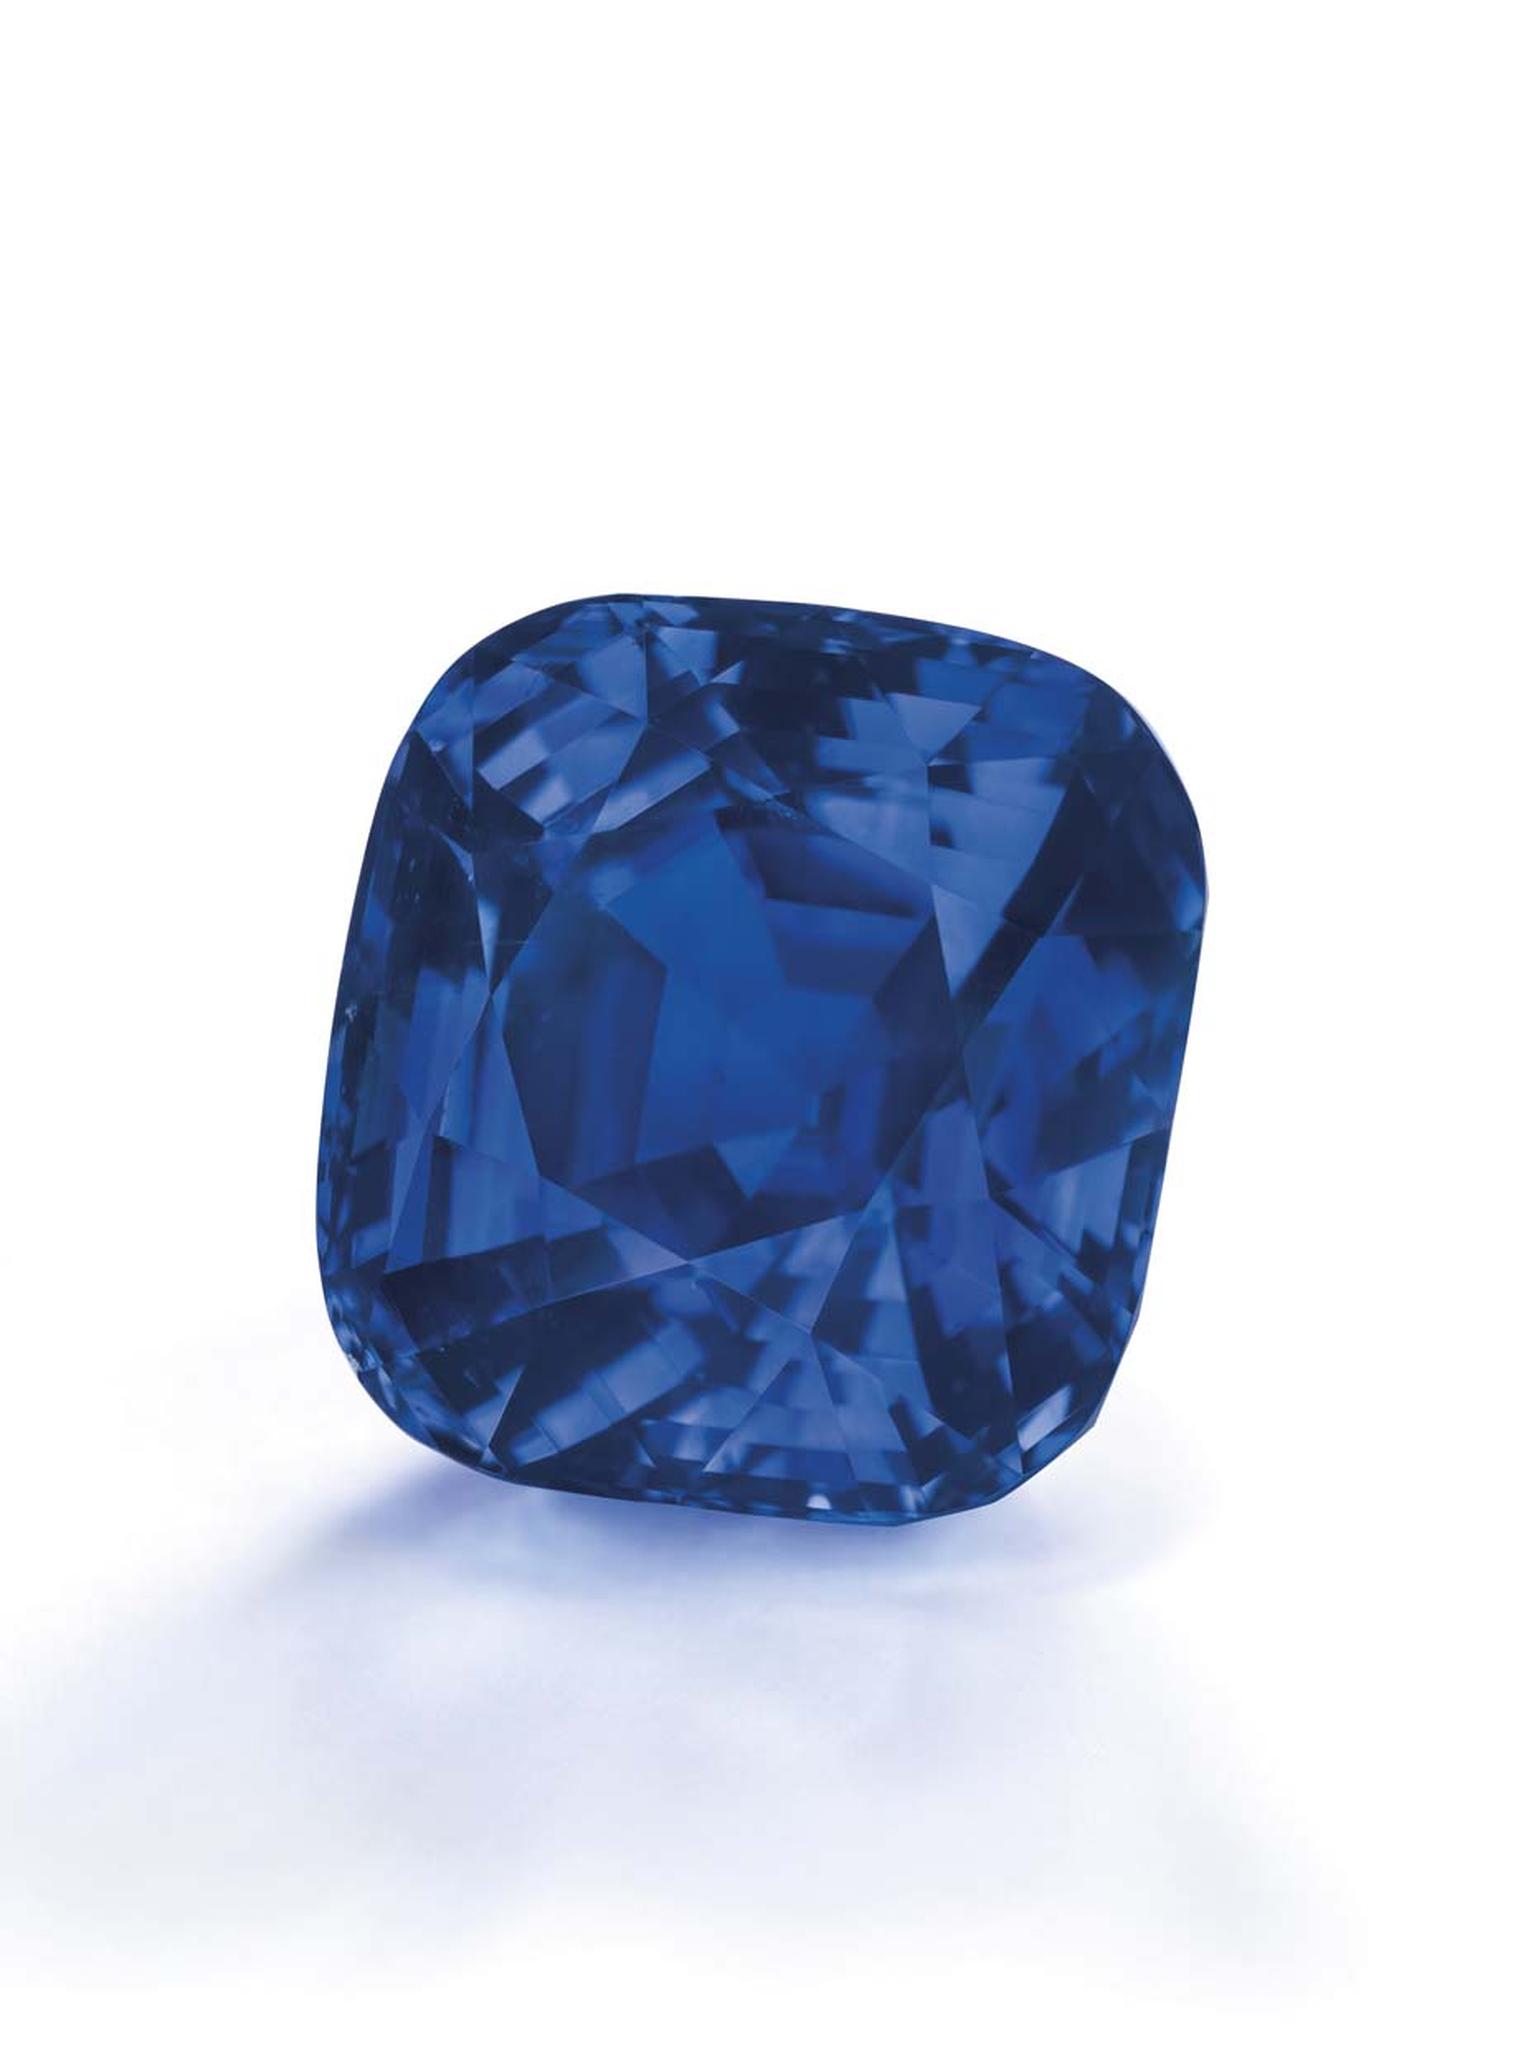 One of the top lots at Christie's Magnificent Jewels Sale in Geneva was this 35.09ct cushion-shaped Kashmir sapphire, which sold for $7.36 million or $209,689 per carat, making it the most valuable Kashmir sapphire ever sold at auction.